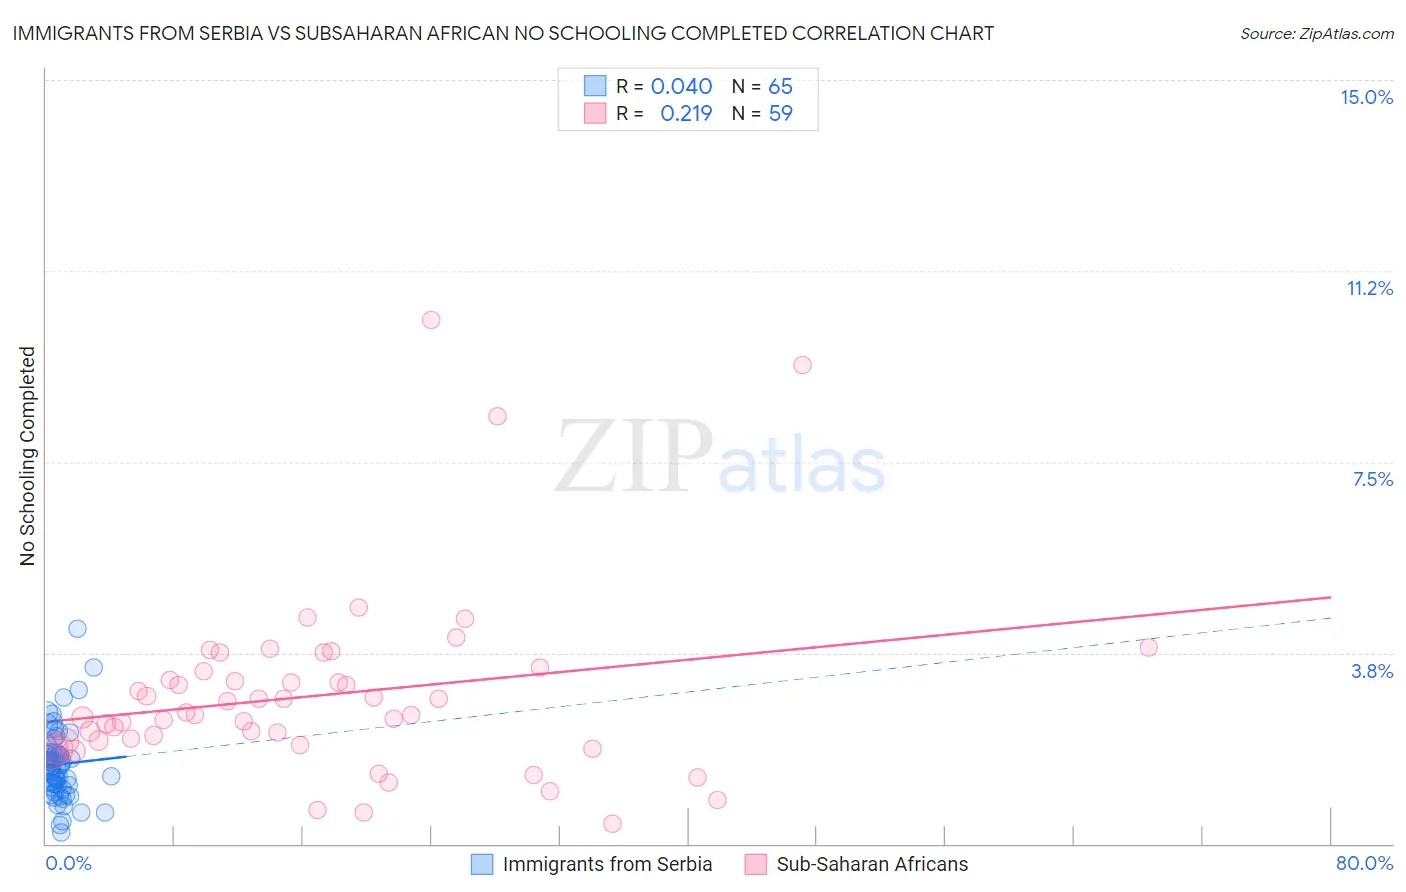 Immigrants from Serbia vs Subsaharan African No Schooling Completed